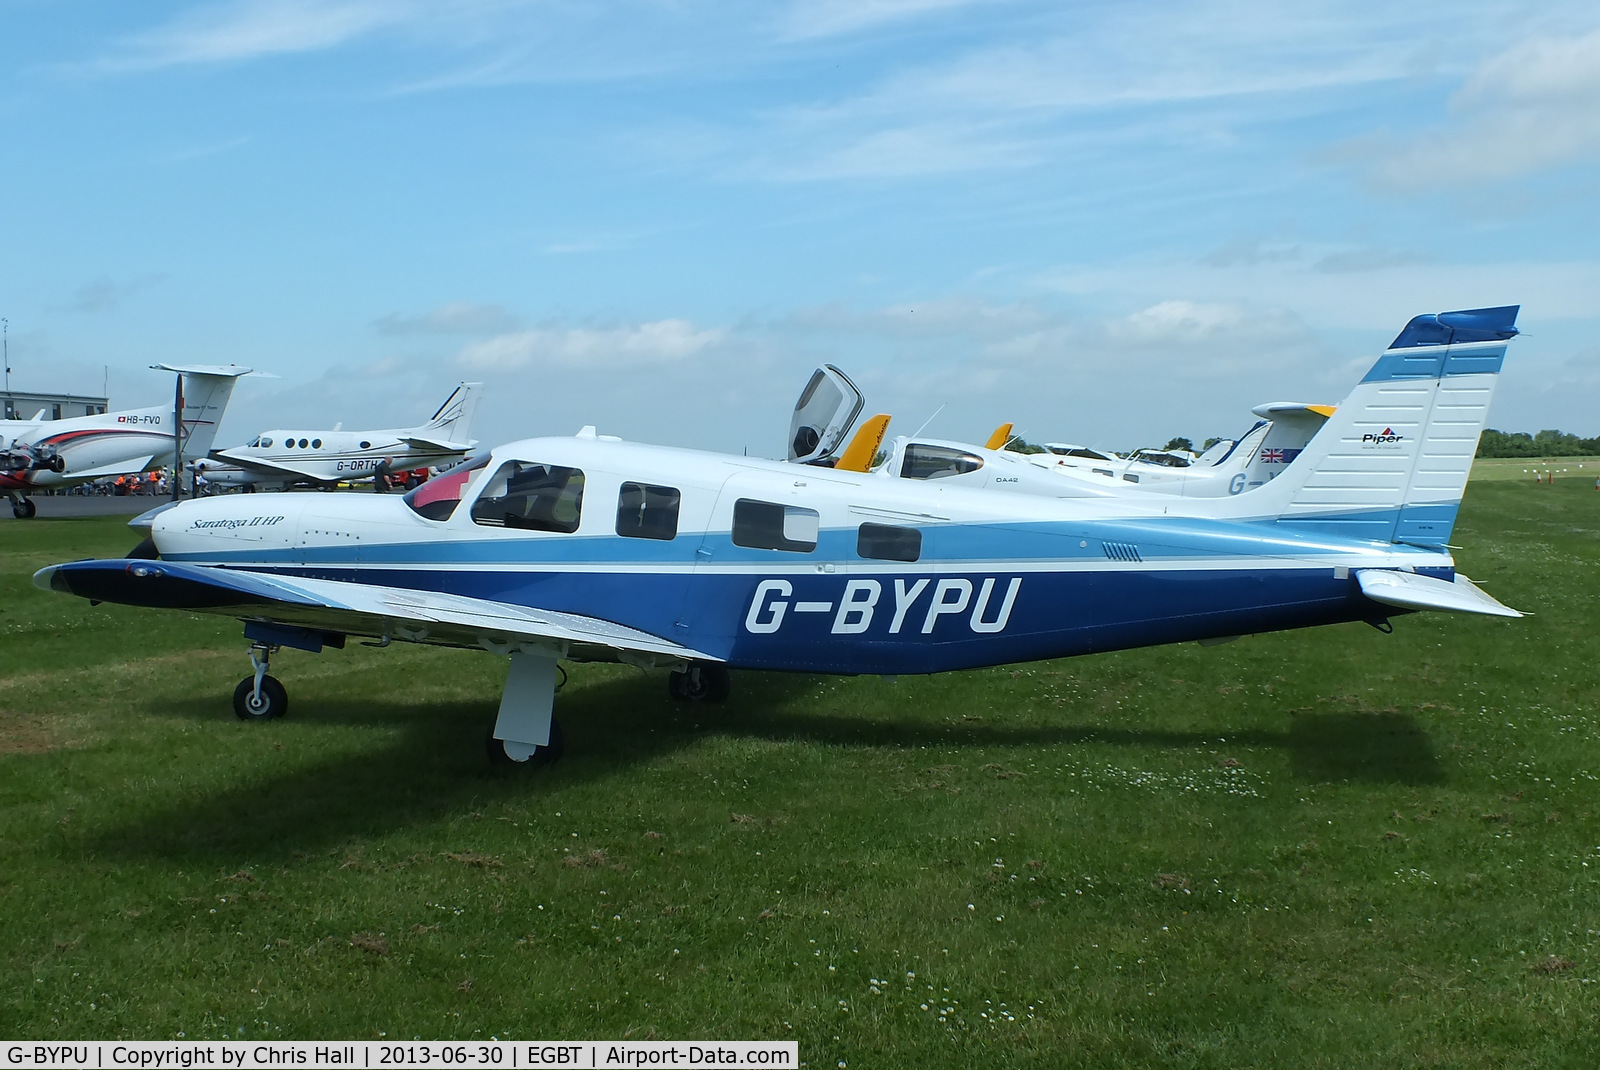 G-BYPU, 1999 Piper PA-32R-301 Saratoga SP C/N 3246150, Visitor at Turweston for the British F1 Grand Prix at Silverstone